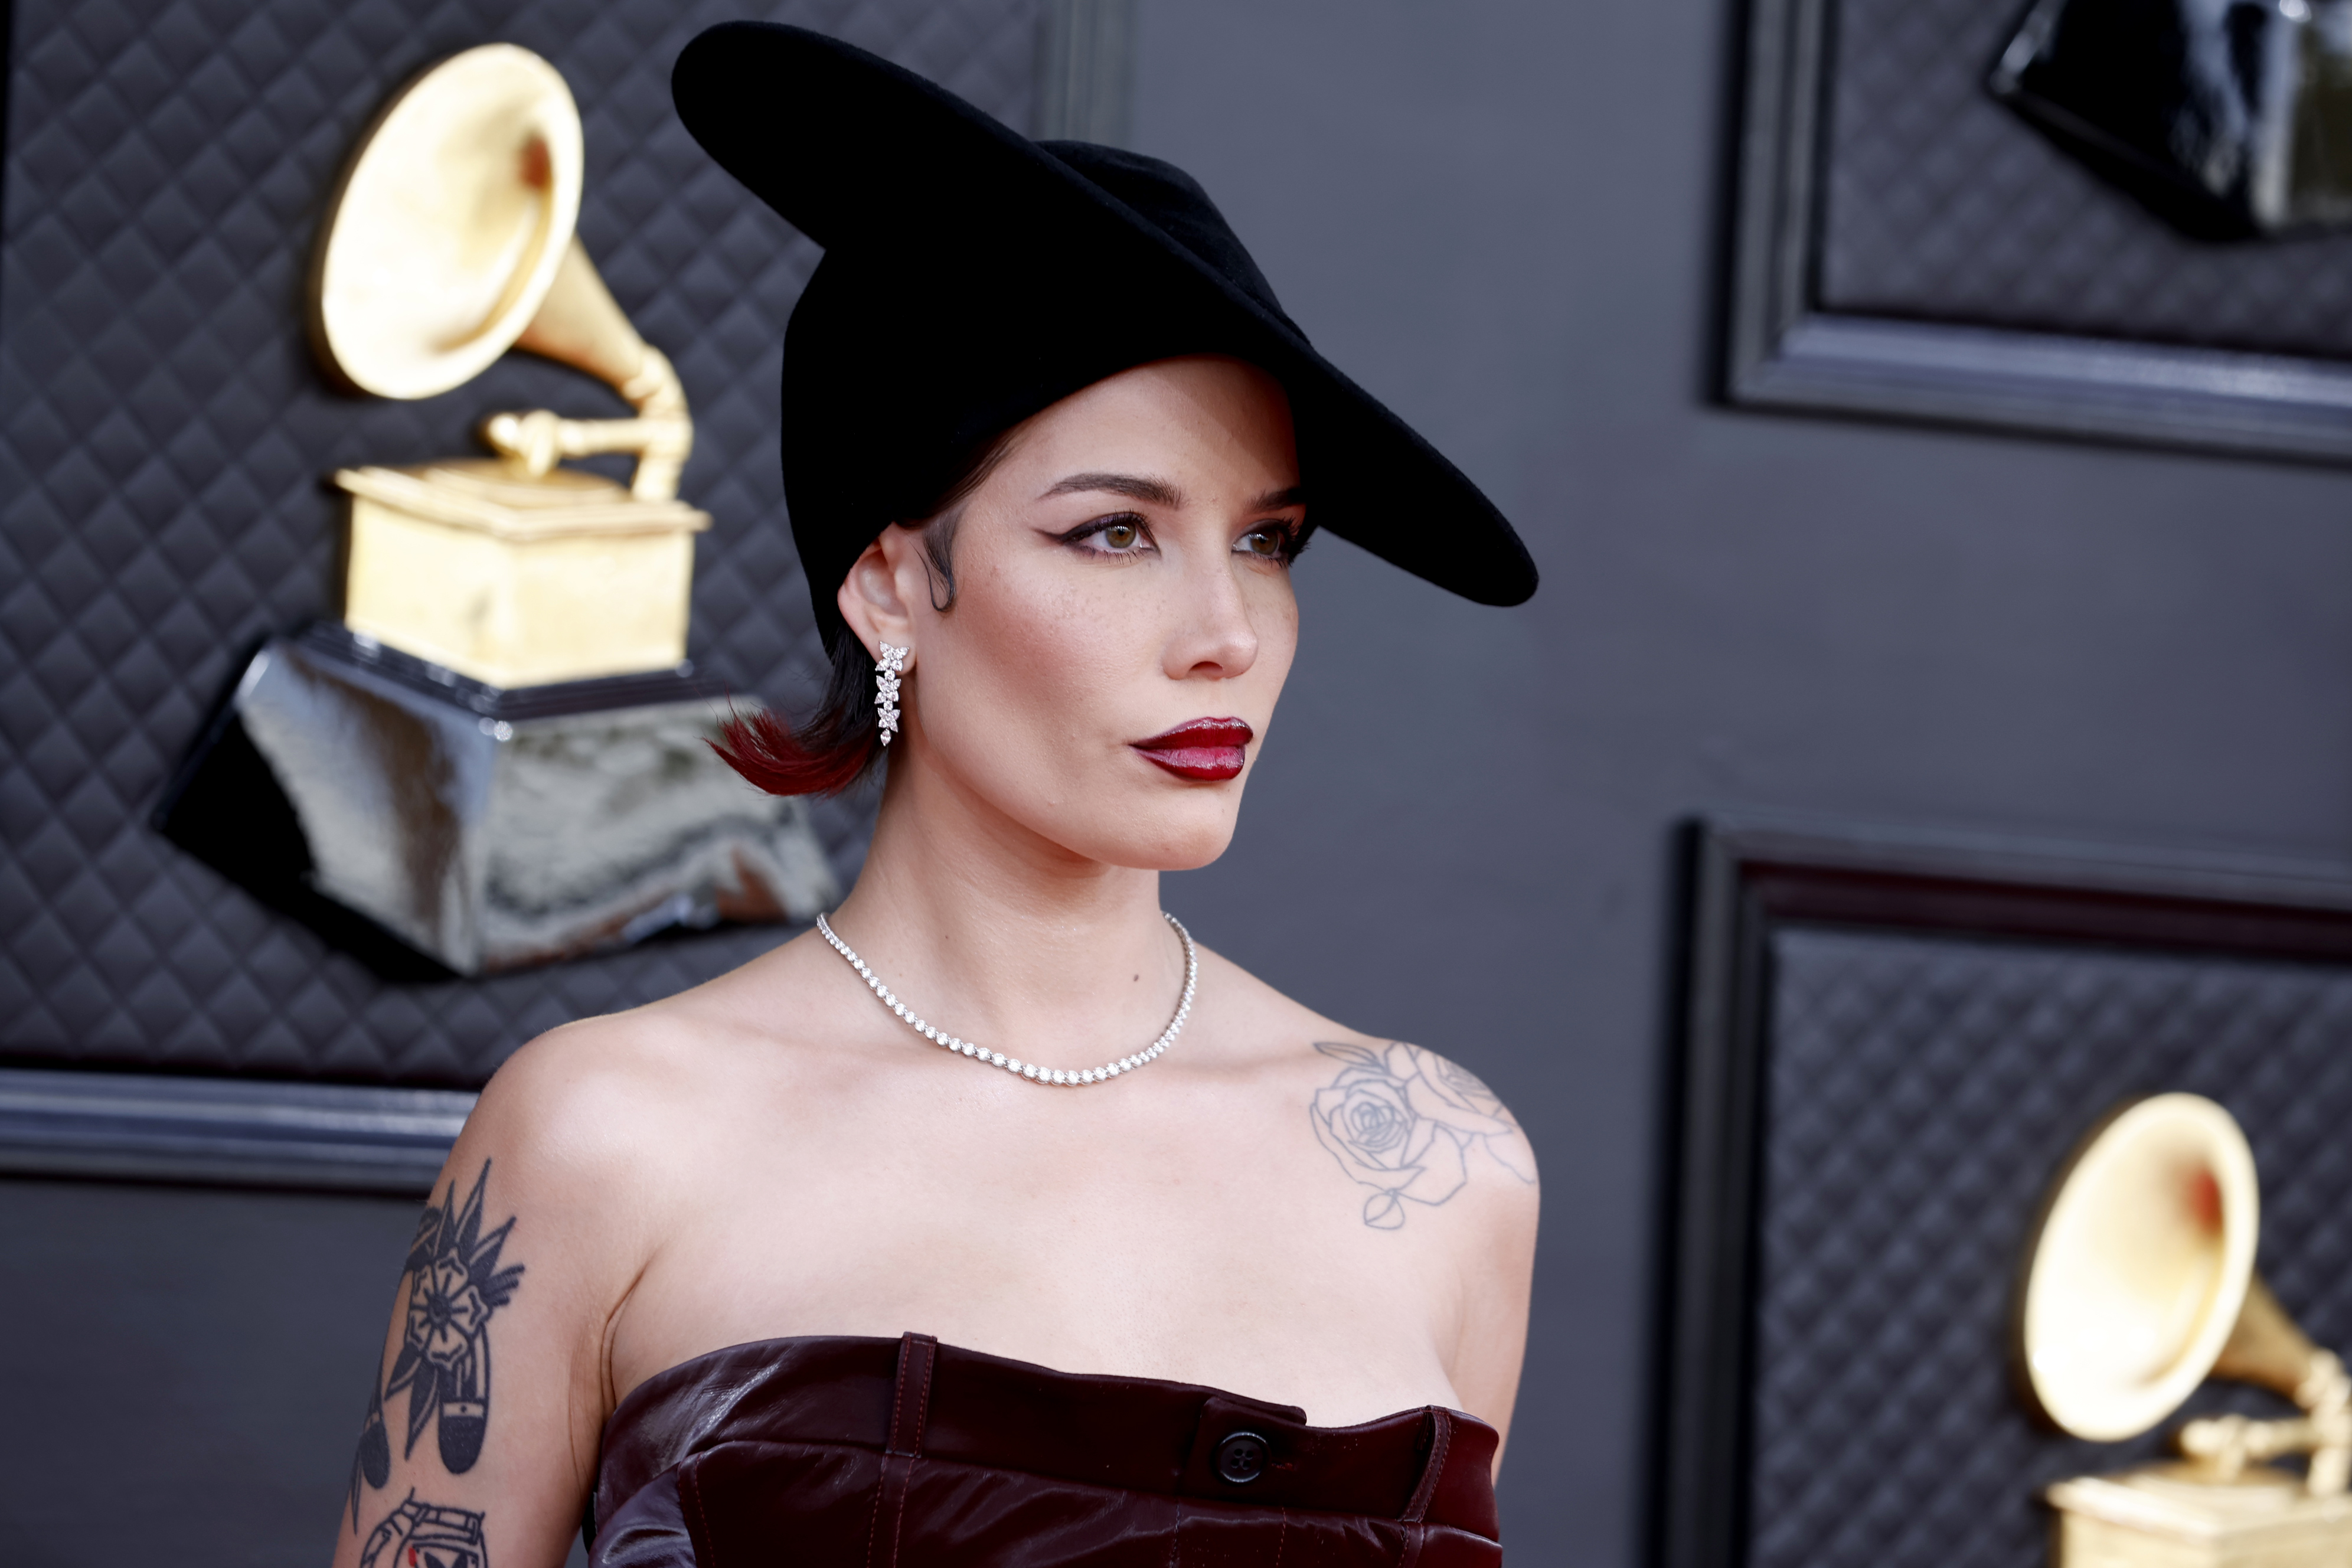 Halsey Describes Having 3 Miscarriages, Says “Abortion Saved My Life”